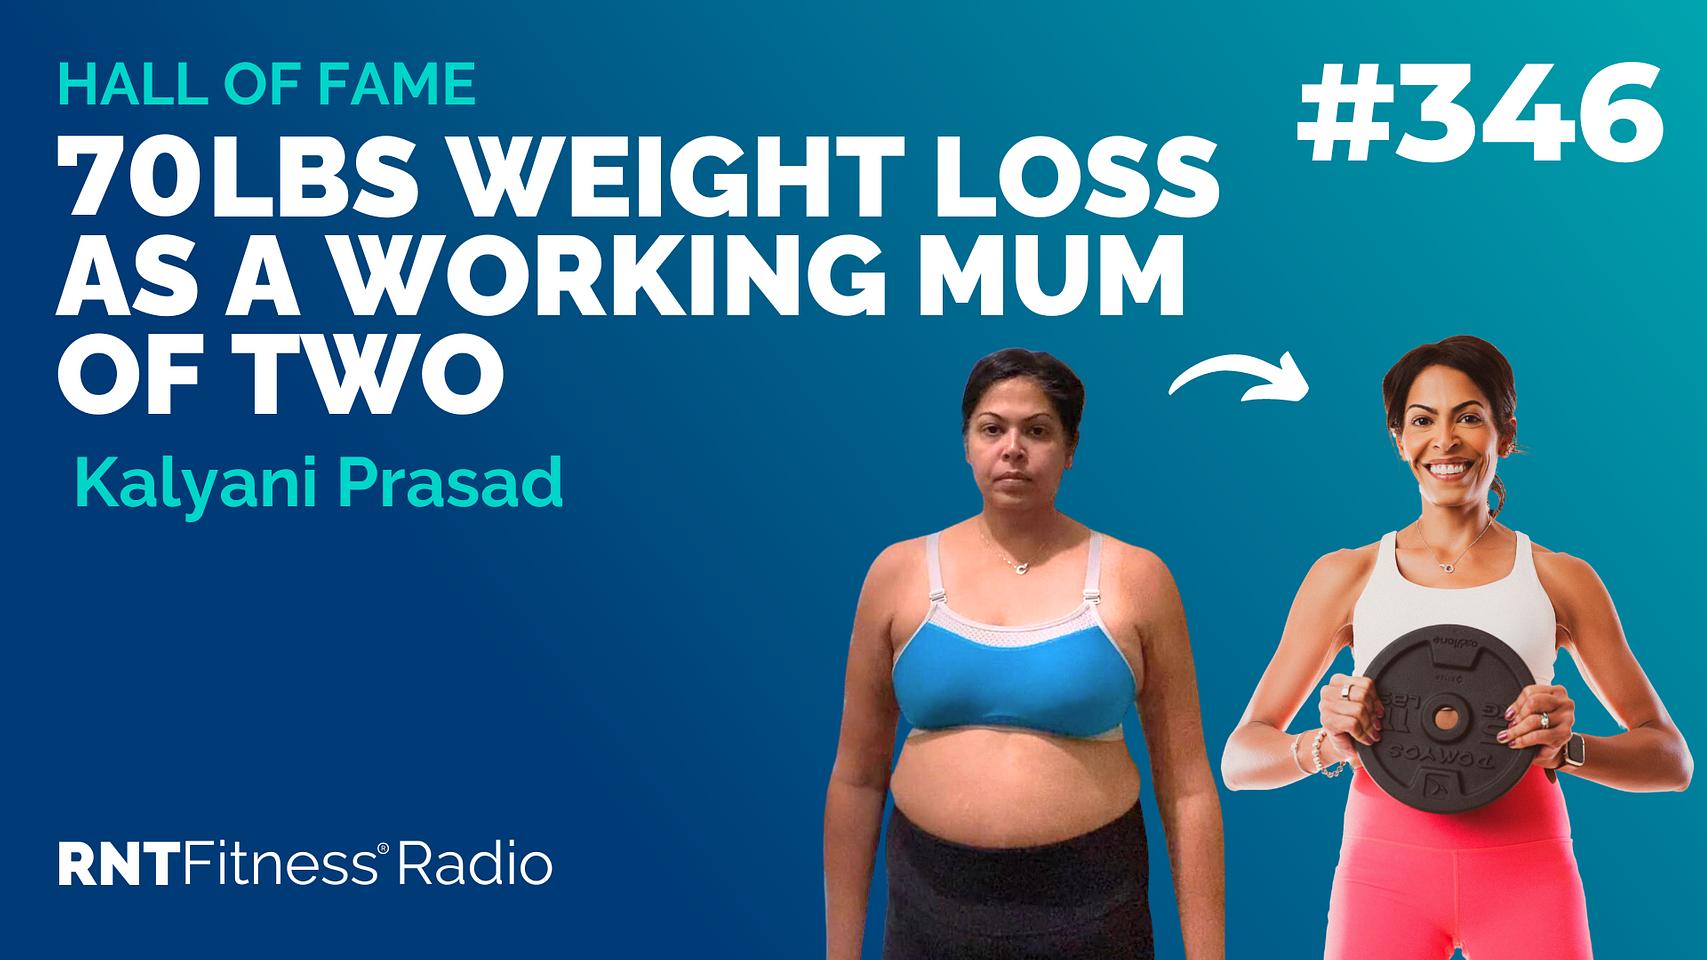 Ep 346 - Hall Of Fame | Kalyani Prasad: 70lbs Weight Loss As A Working Mum Of Two